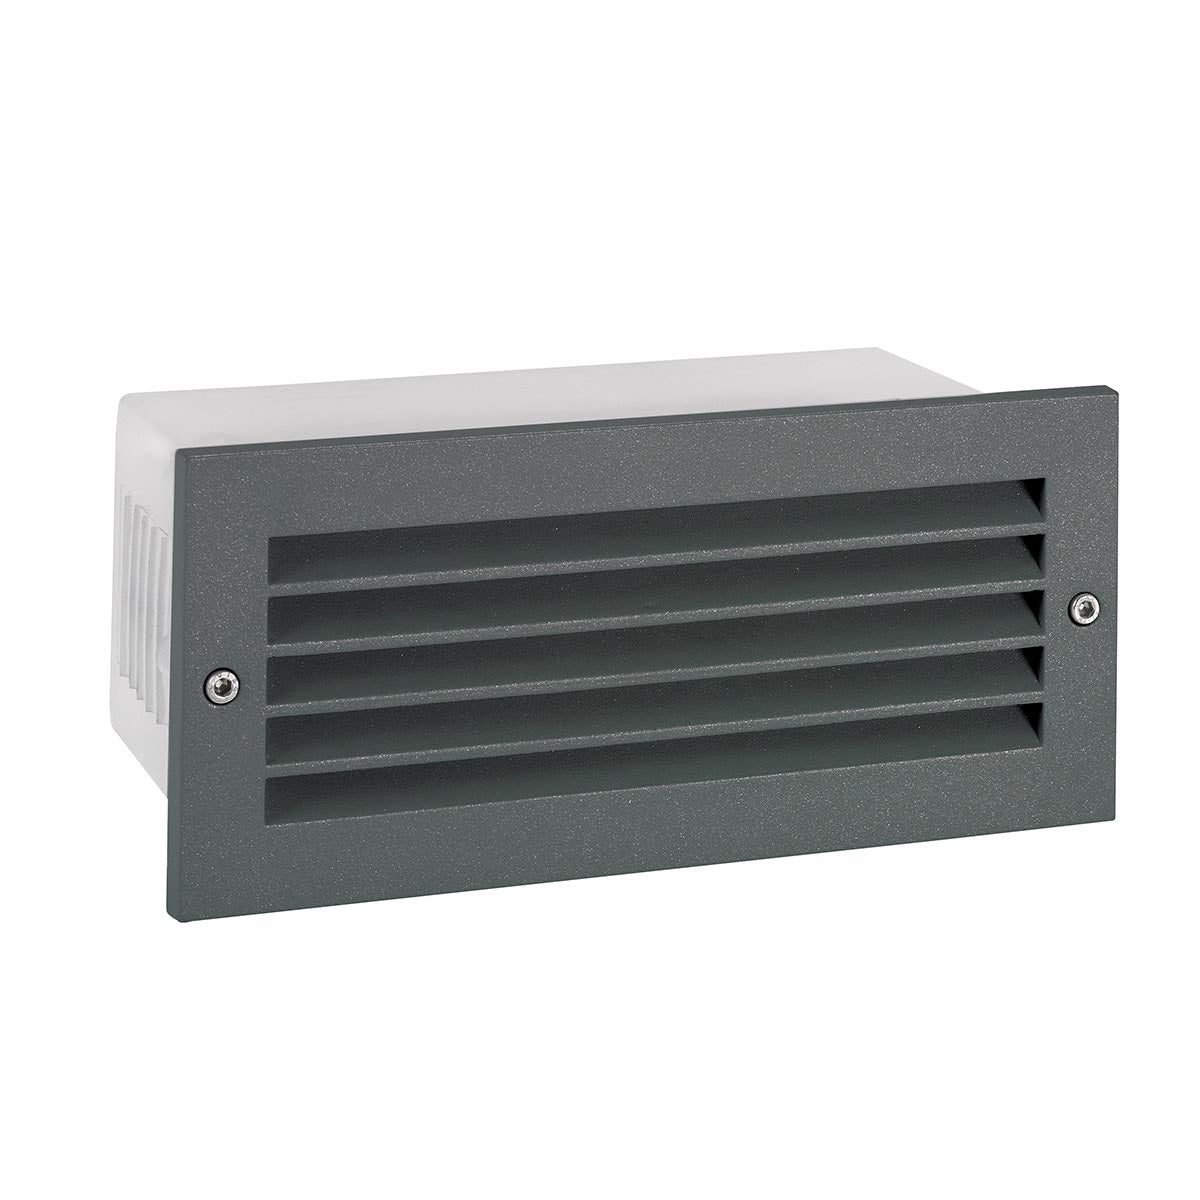 Grimstad LED Recessed Grill/Plane Wall Light - Graphite Finish - Cusack Lighting